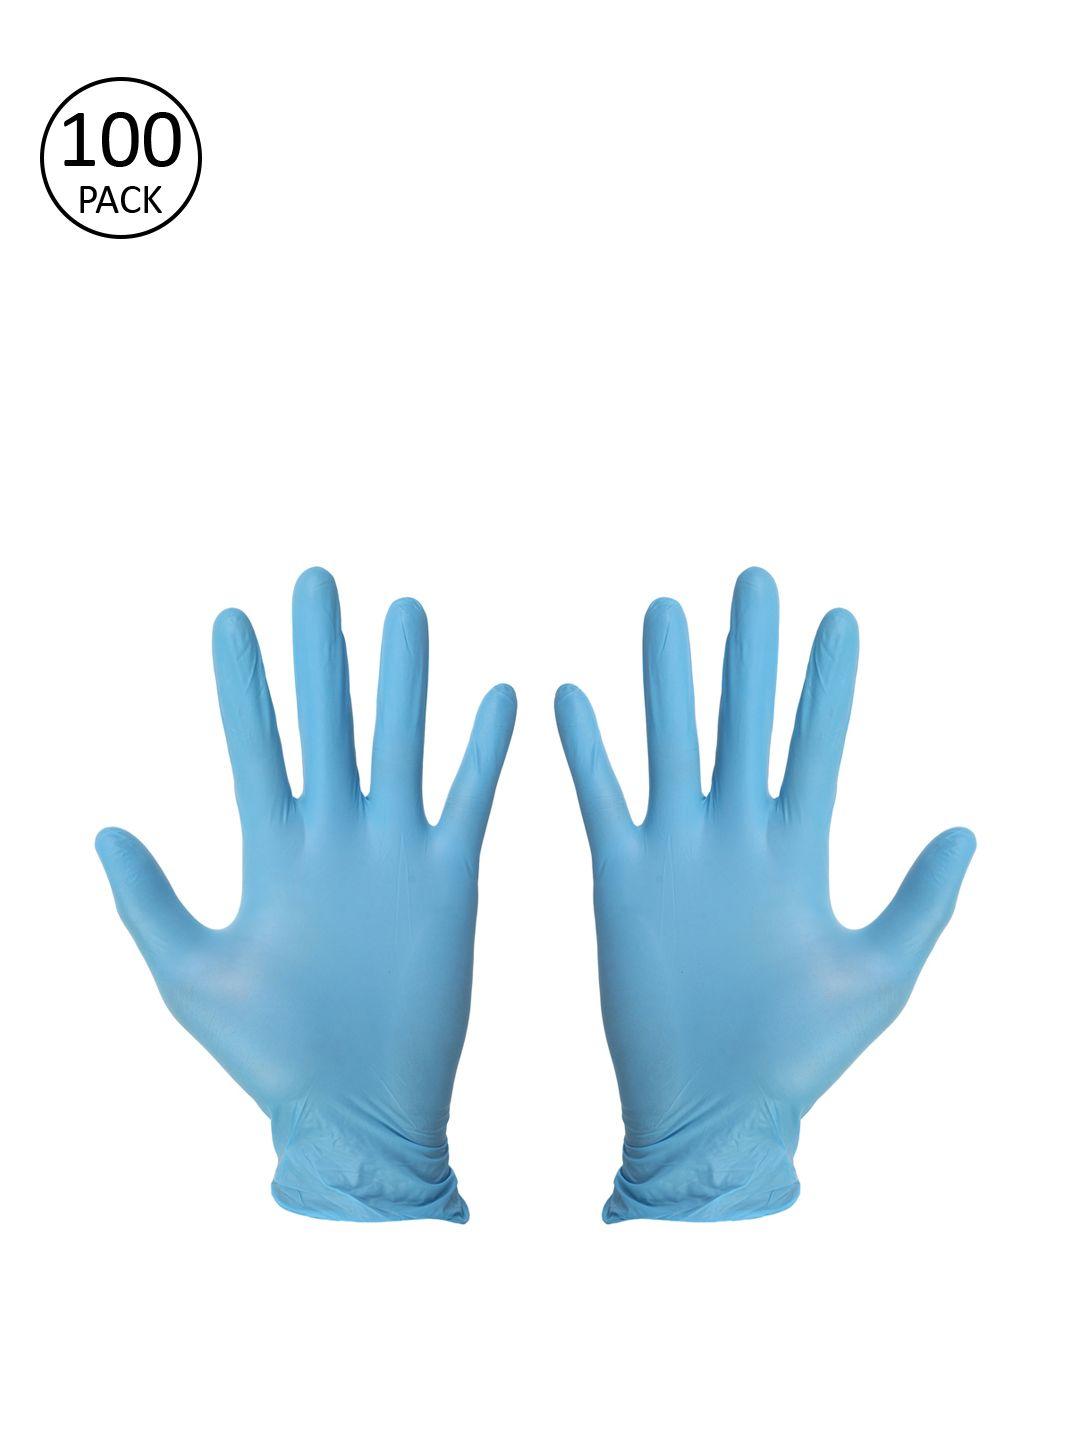 london fashion hob unisex pack of 100 blue solid disposable hand gloves